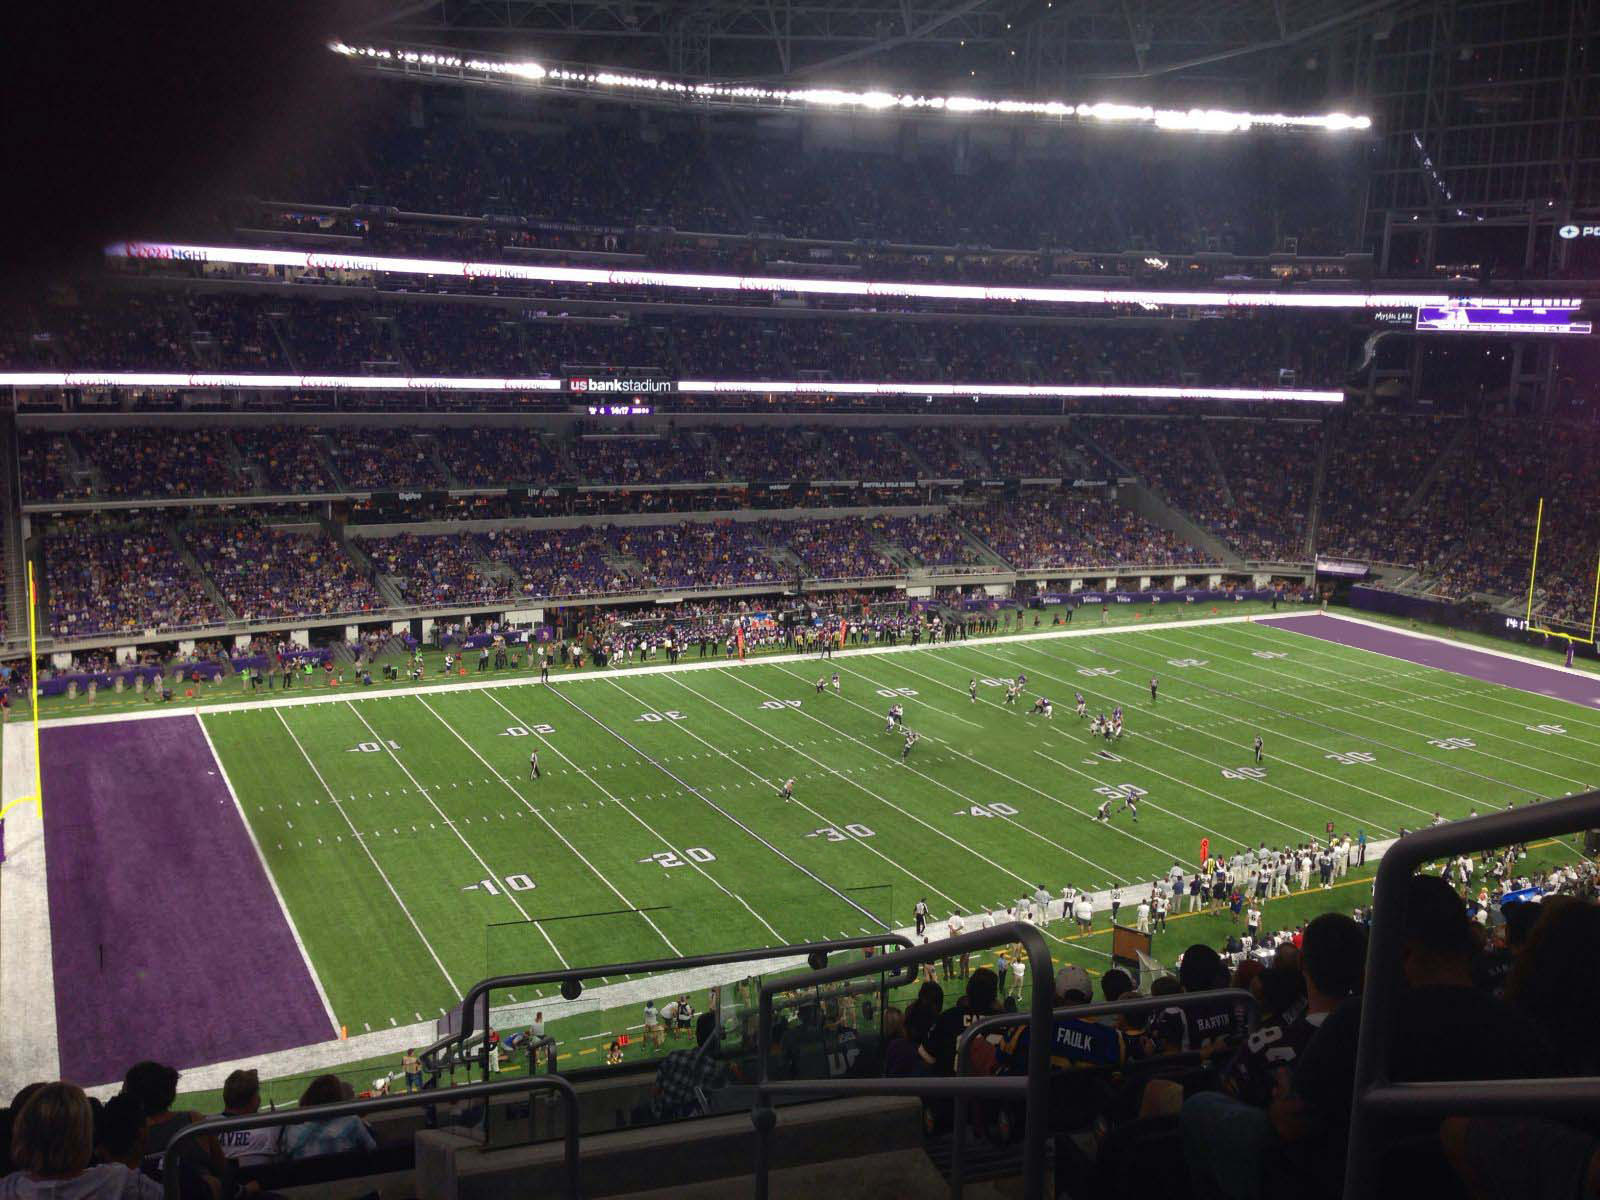 section 216, row 12 seat view  for football - u.s. bank stadium